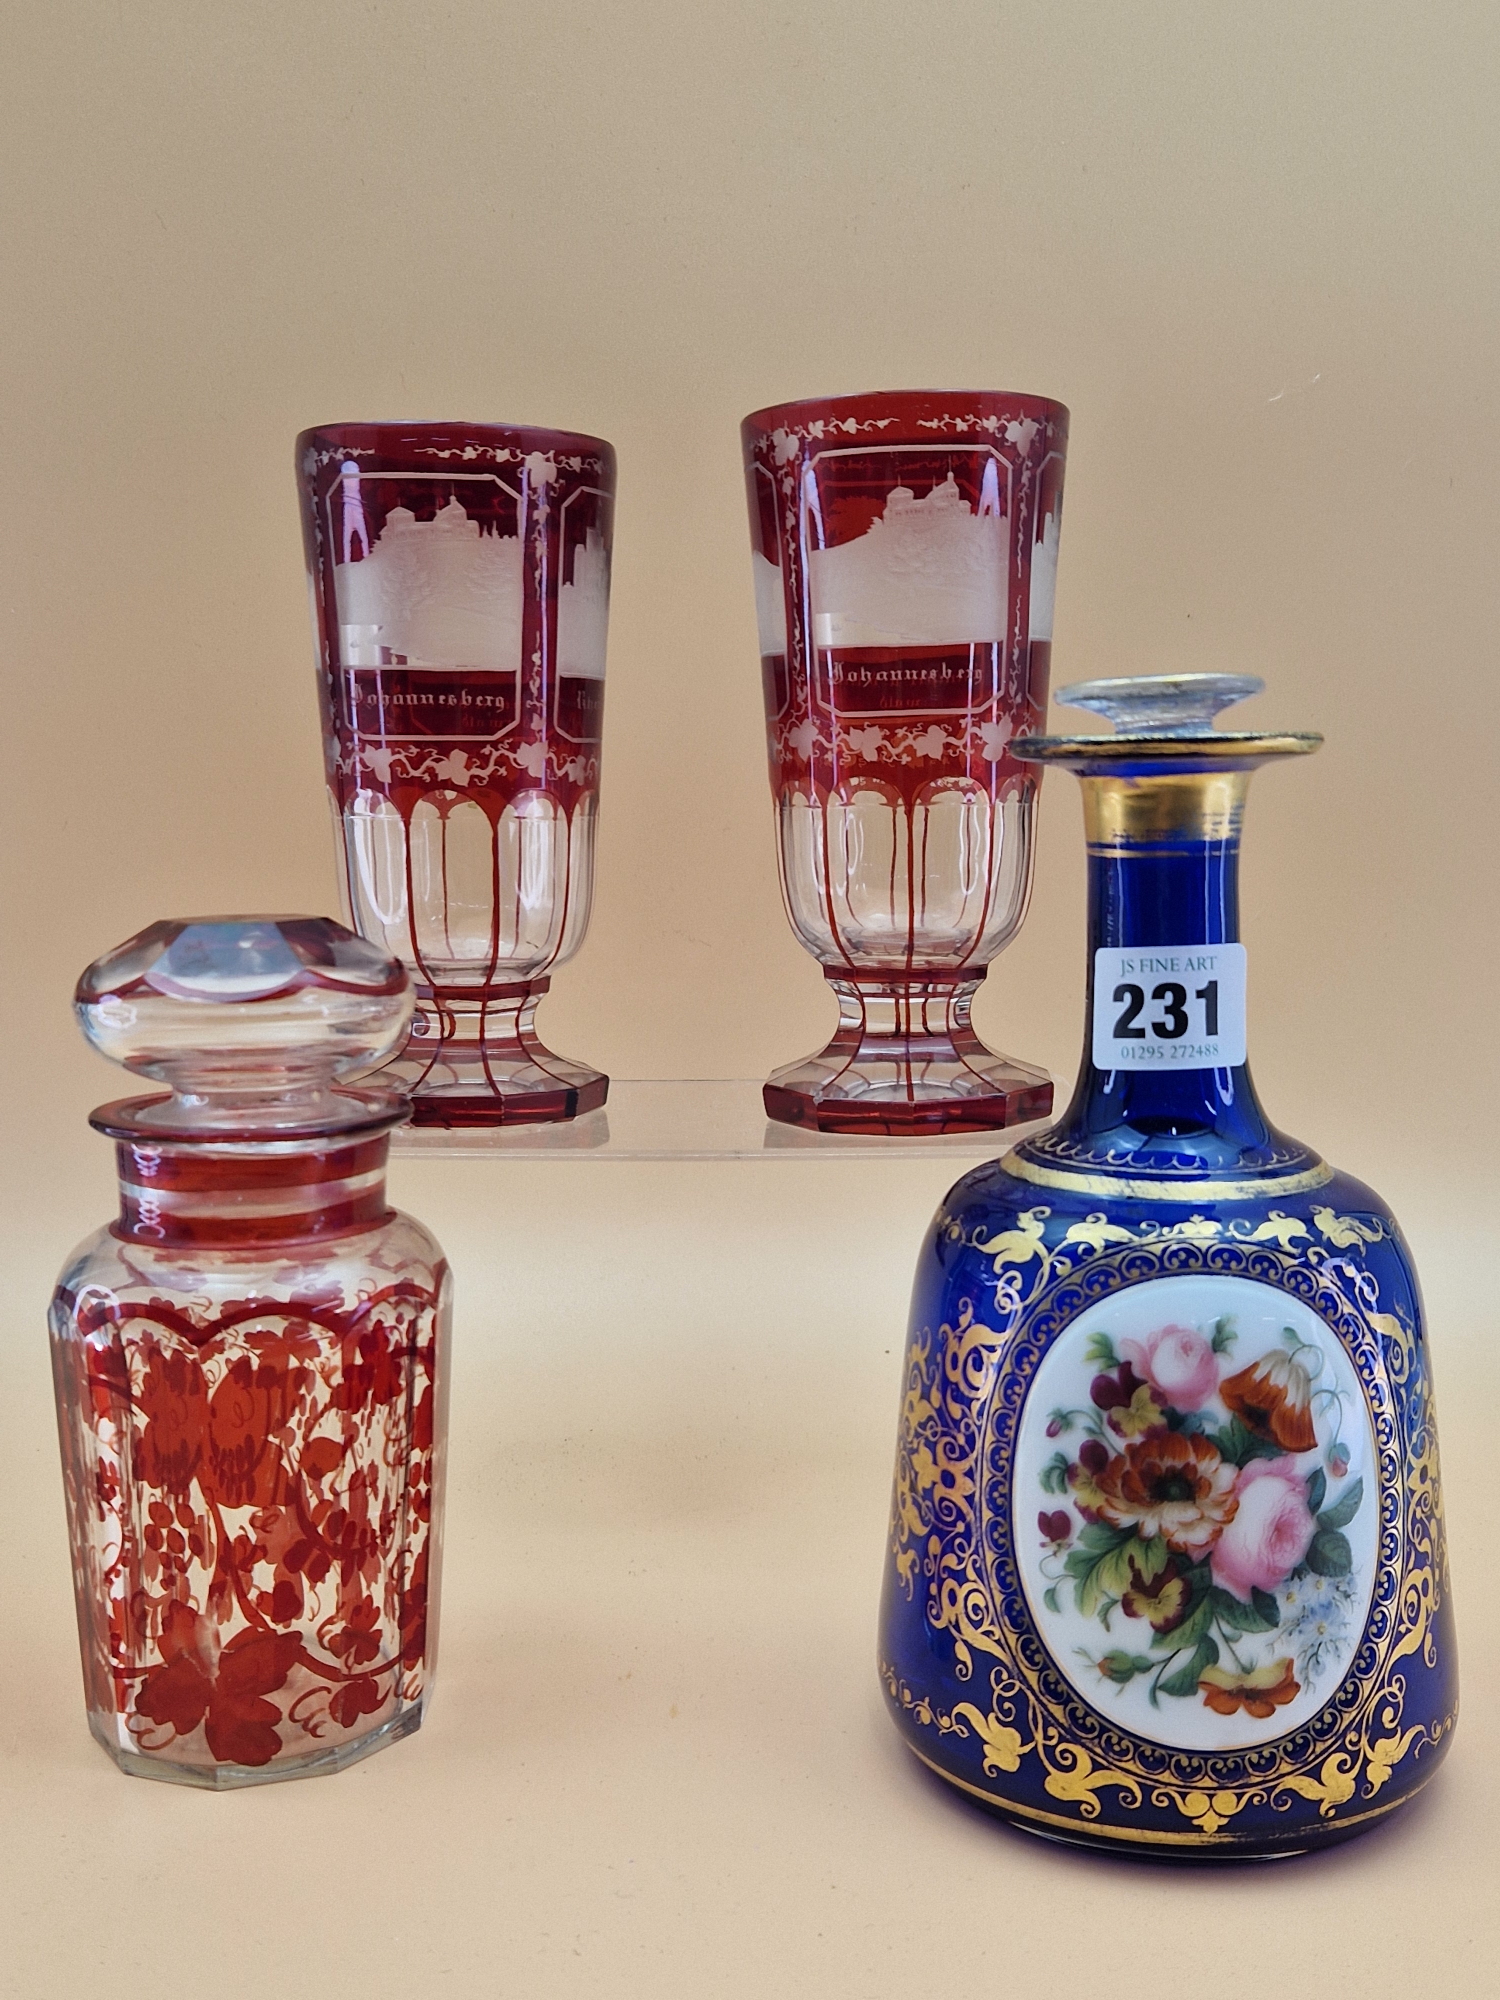 A PAIR OF BOHEMIAN RUBY OVERLAY VASES ENGRAVED WITH VIEWS OF RHEINSTEIN, JOHANNESBERG AND OTHER